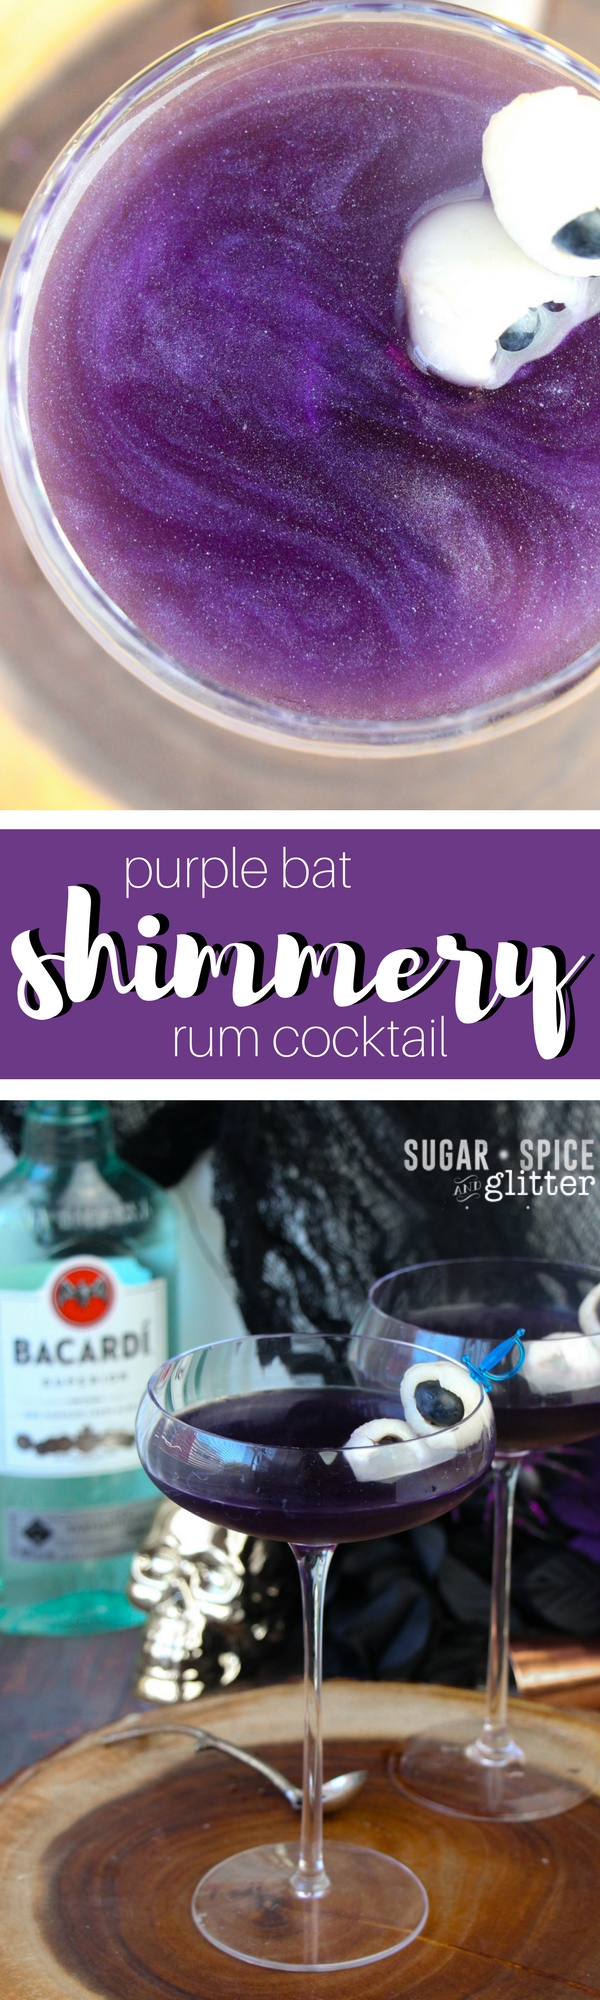 A gorgeous shimmery rum cocktail that is simply mesmerizing. It looks almost like a starry night sky - and for a spooky Halloween touch, add two fruit eyeballs!